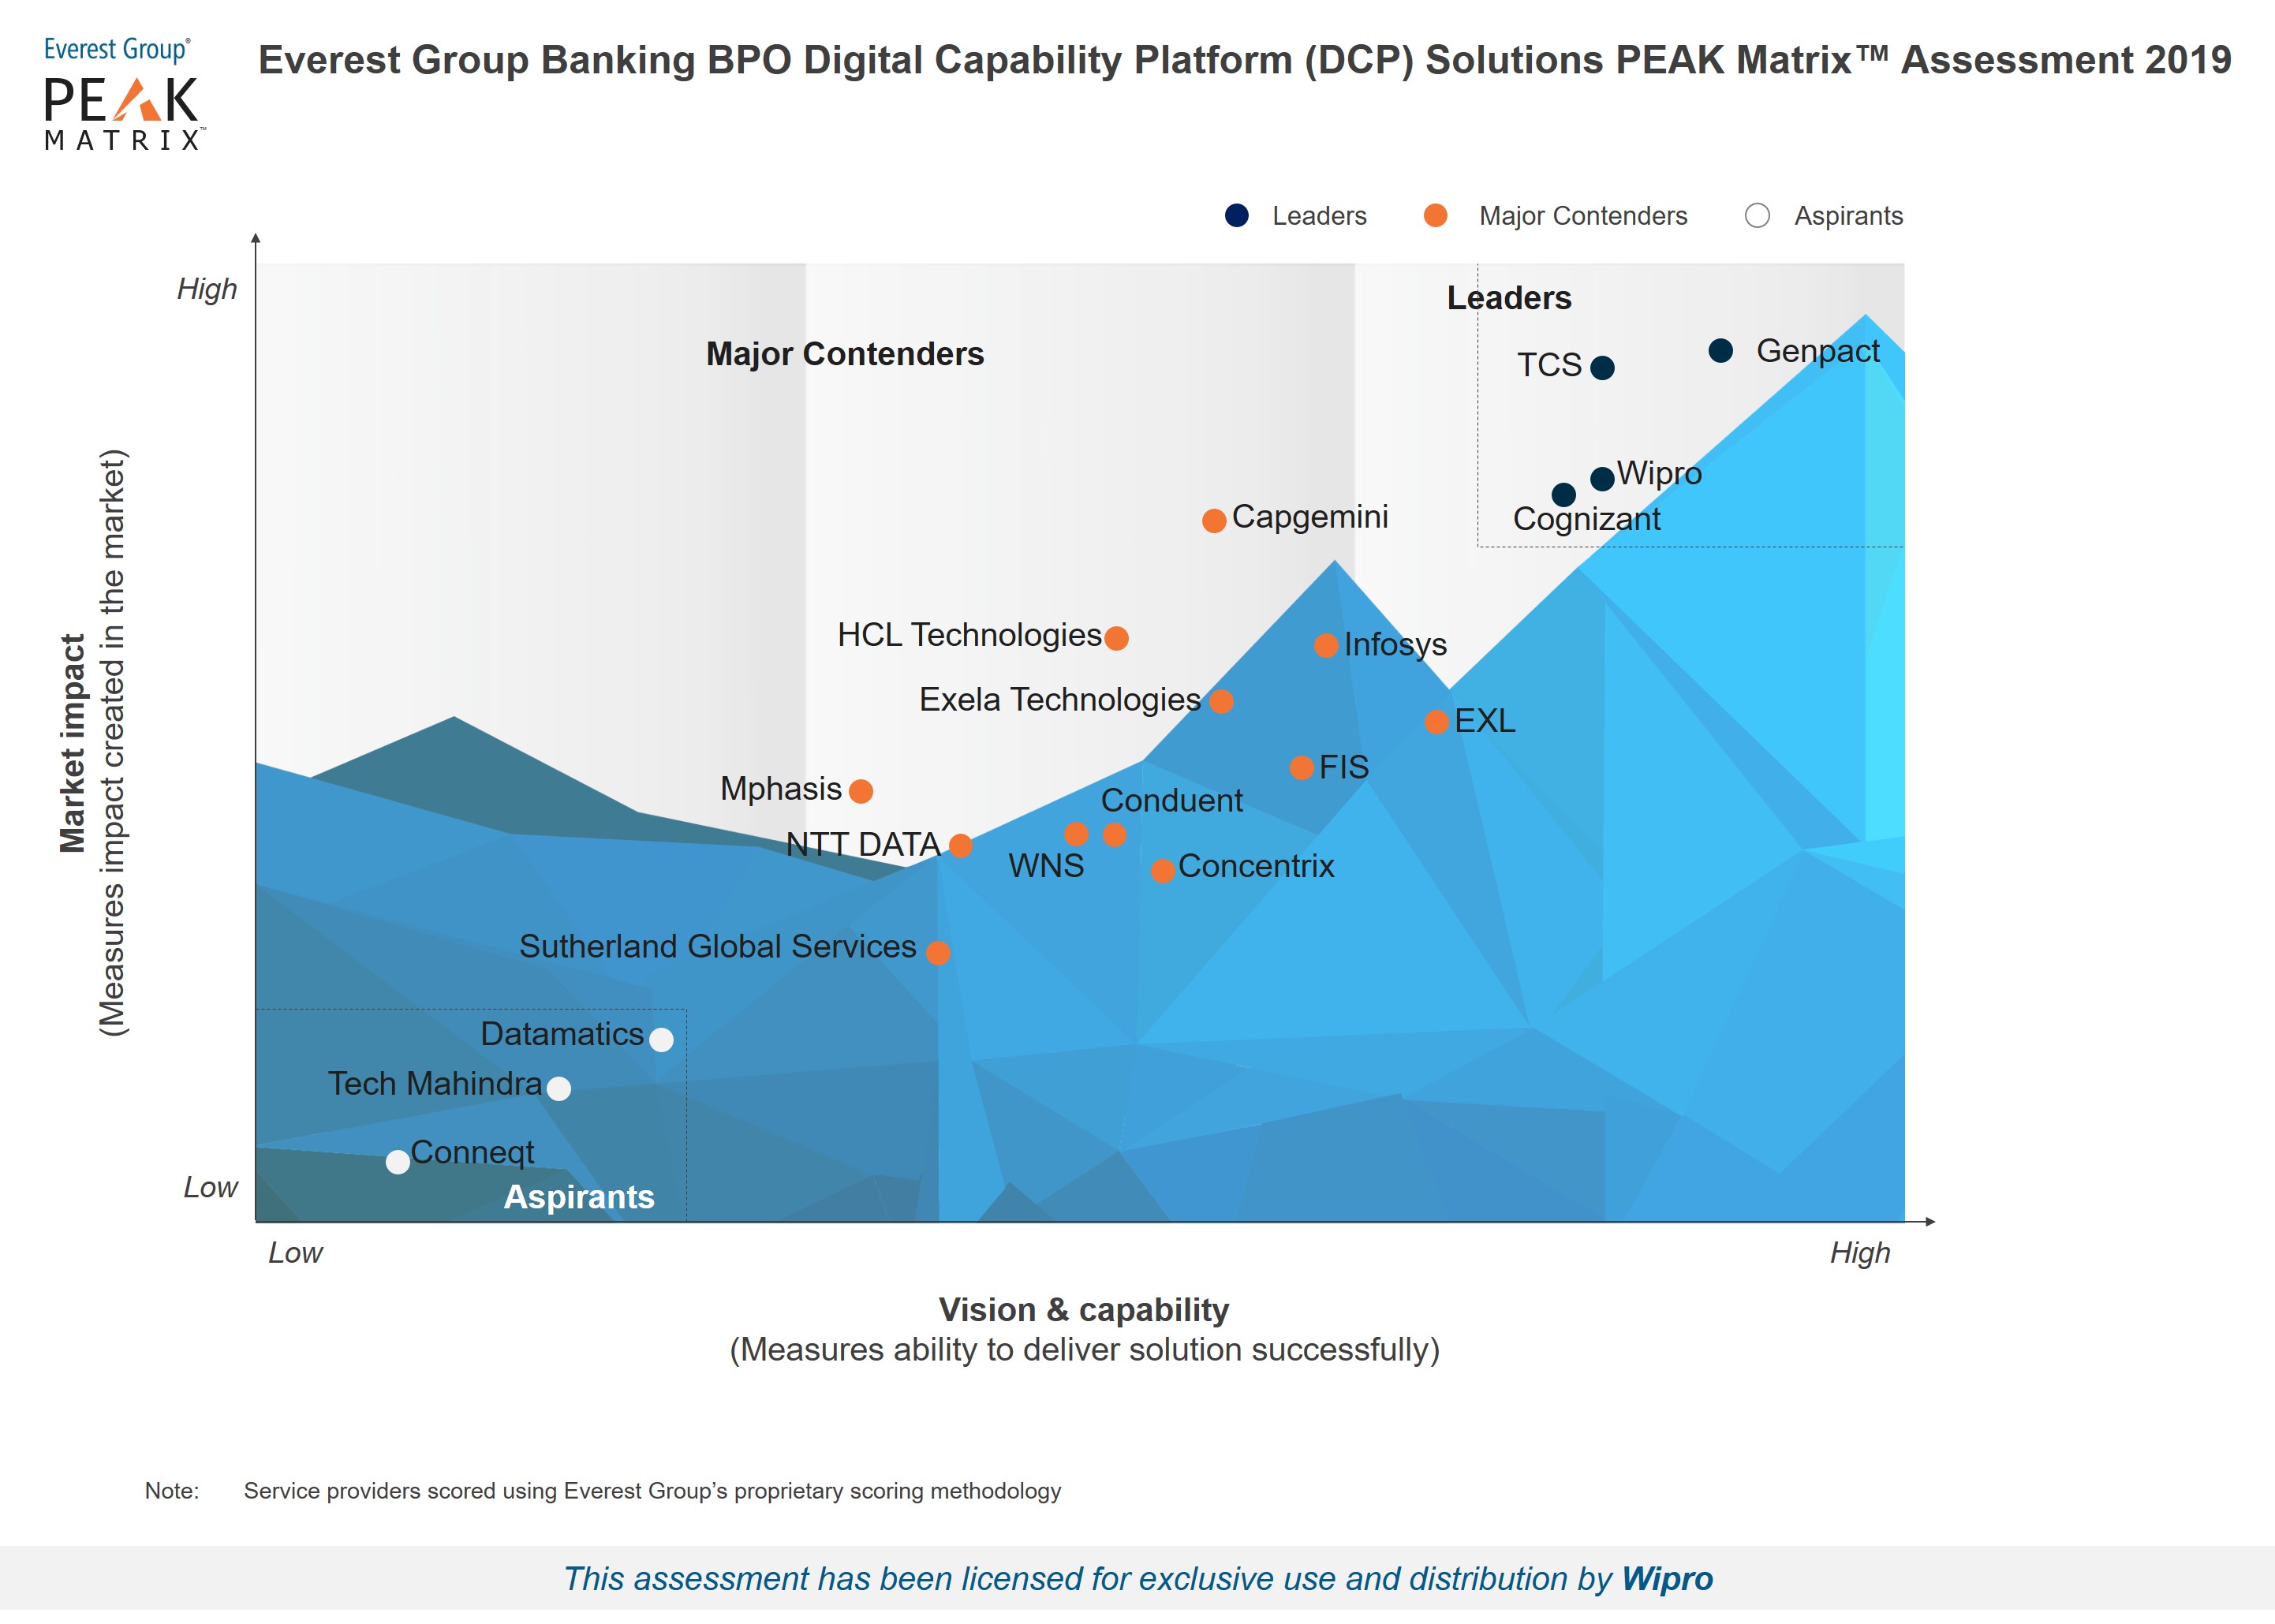 Wipro is a leader in the Banking BPO Digital Capability Platform (DCP) - Service Provider Landscape with Solutions PEAK Matrix™ Assessment 2019 